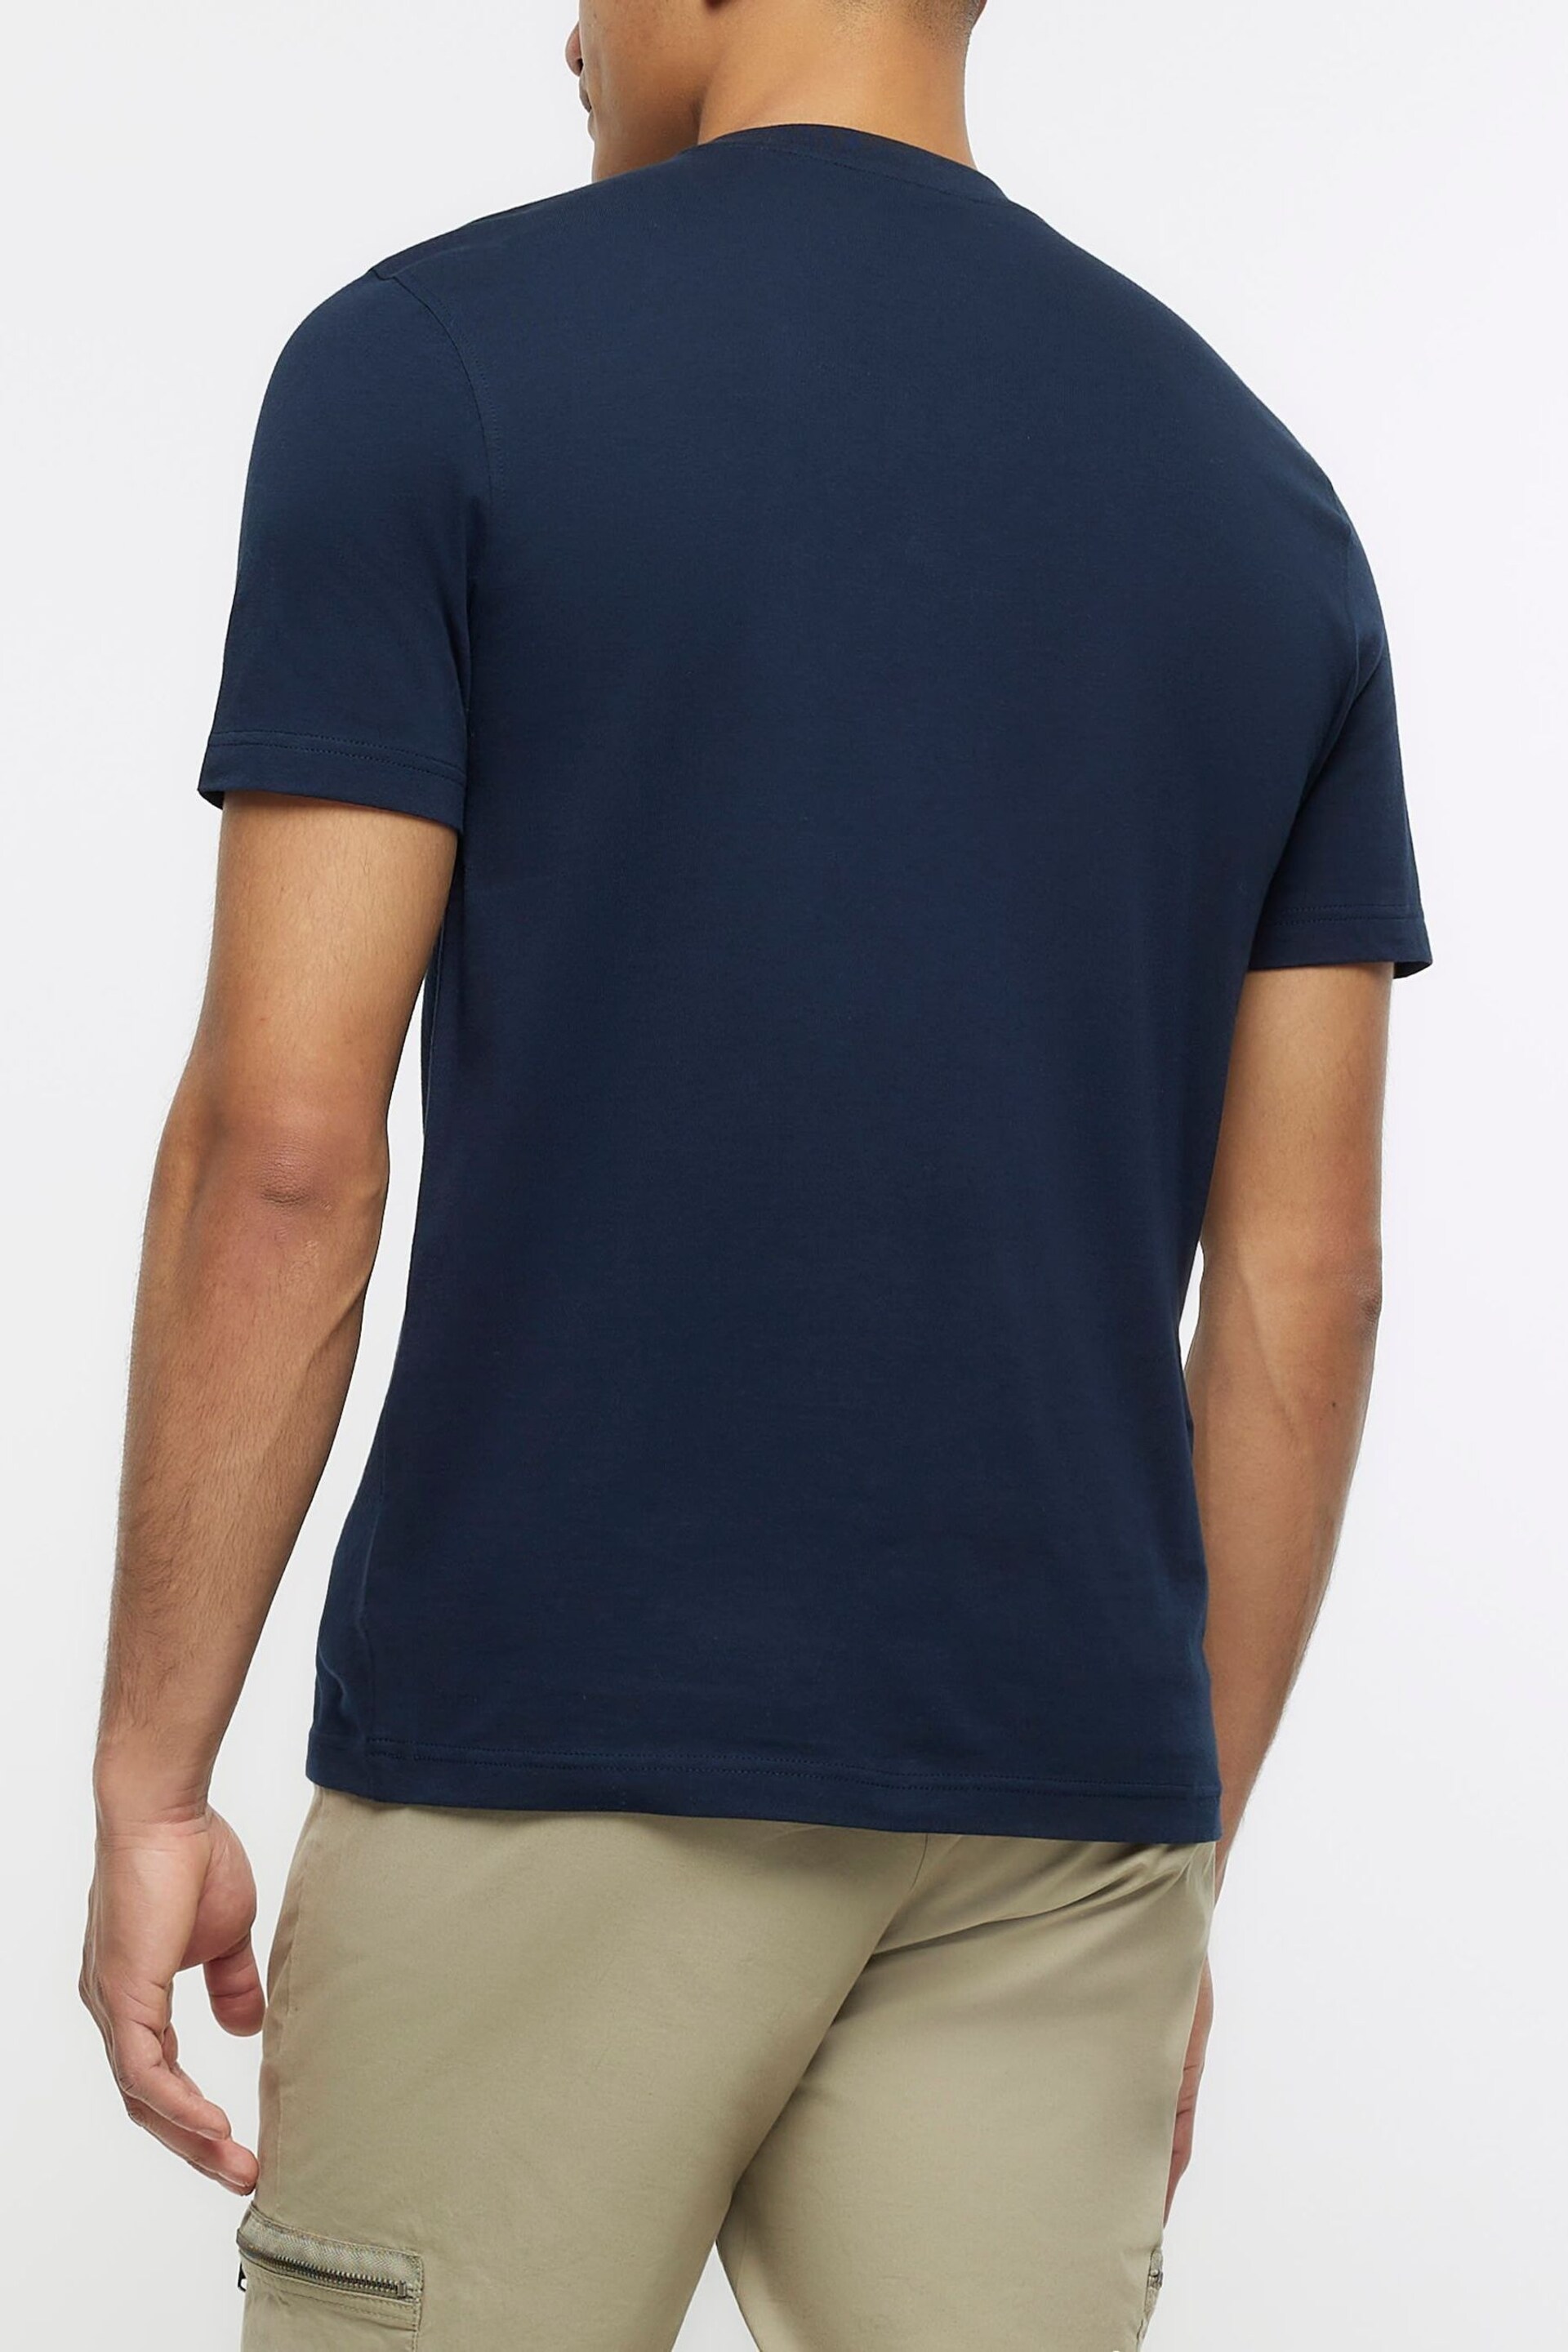 River Island Navy Blue Slim Fit T-Shirt - Image 2 of 4